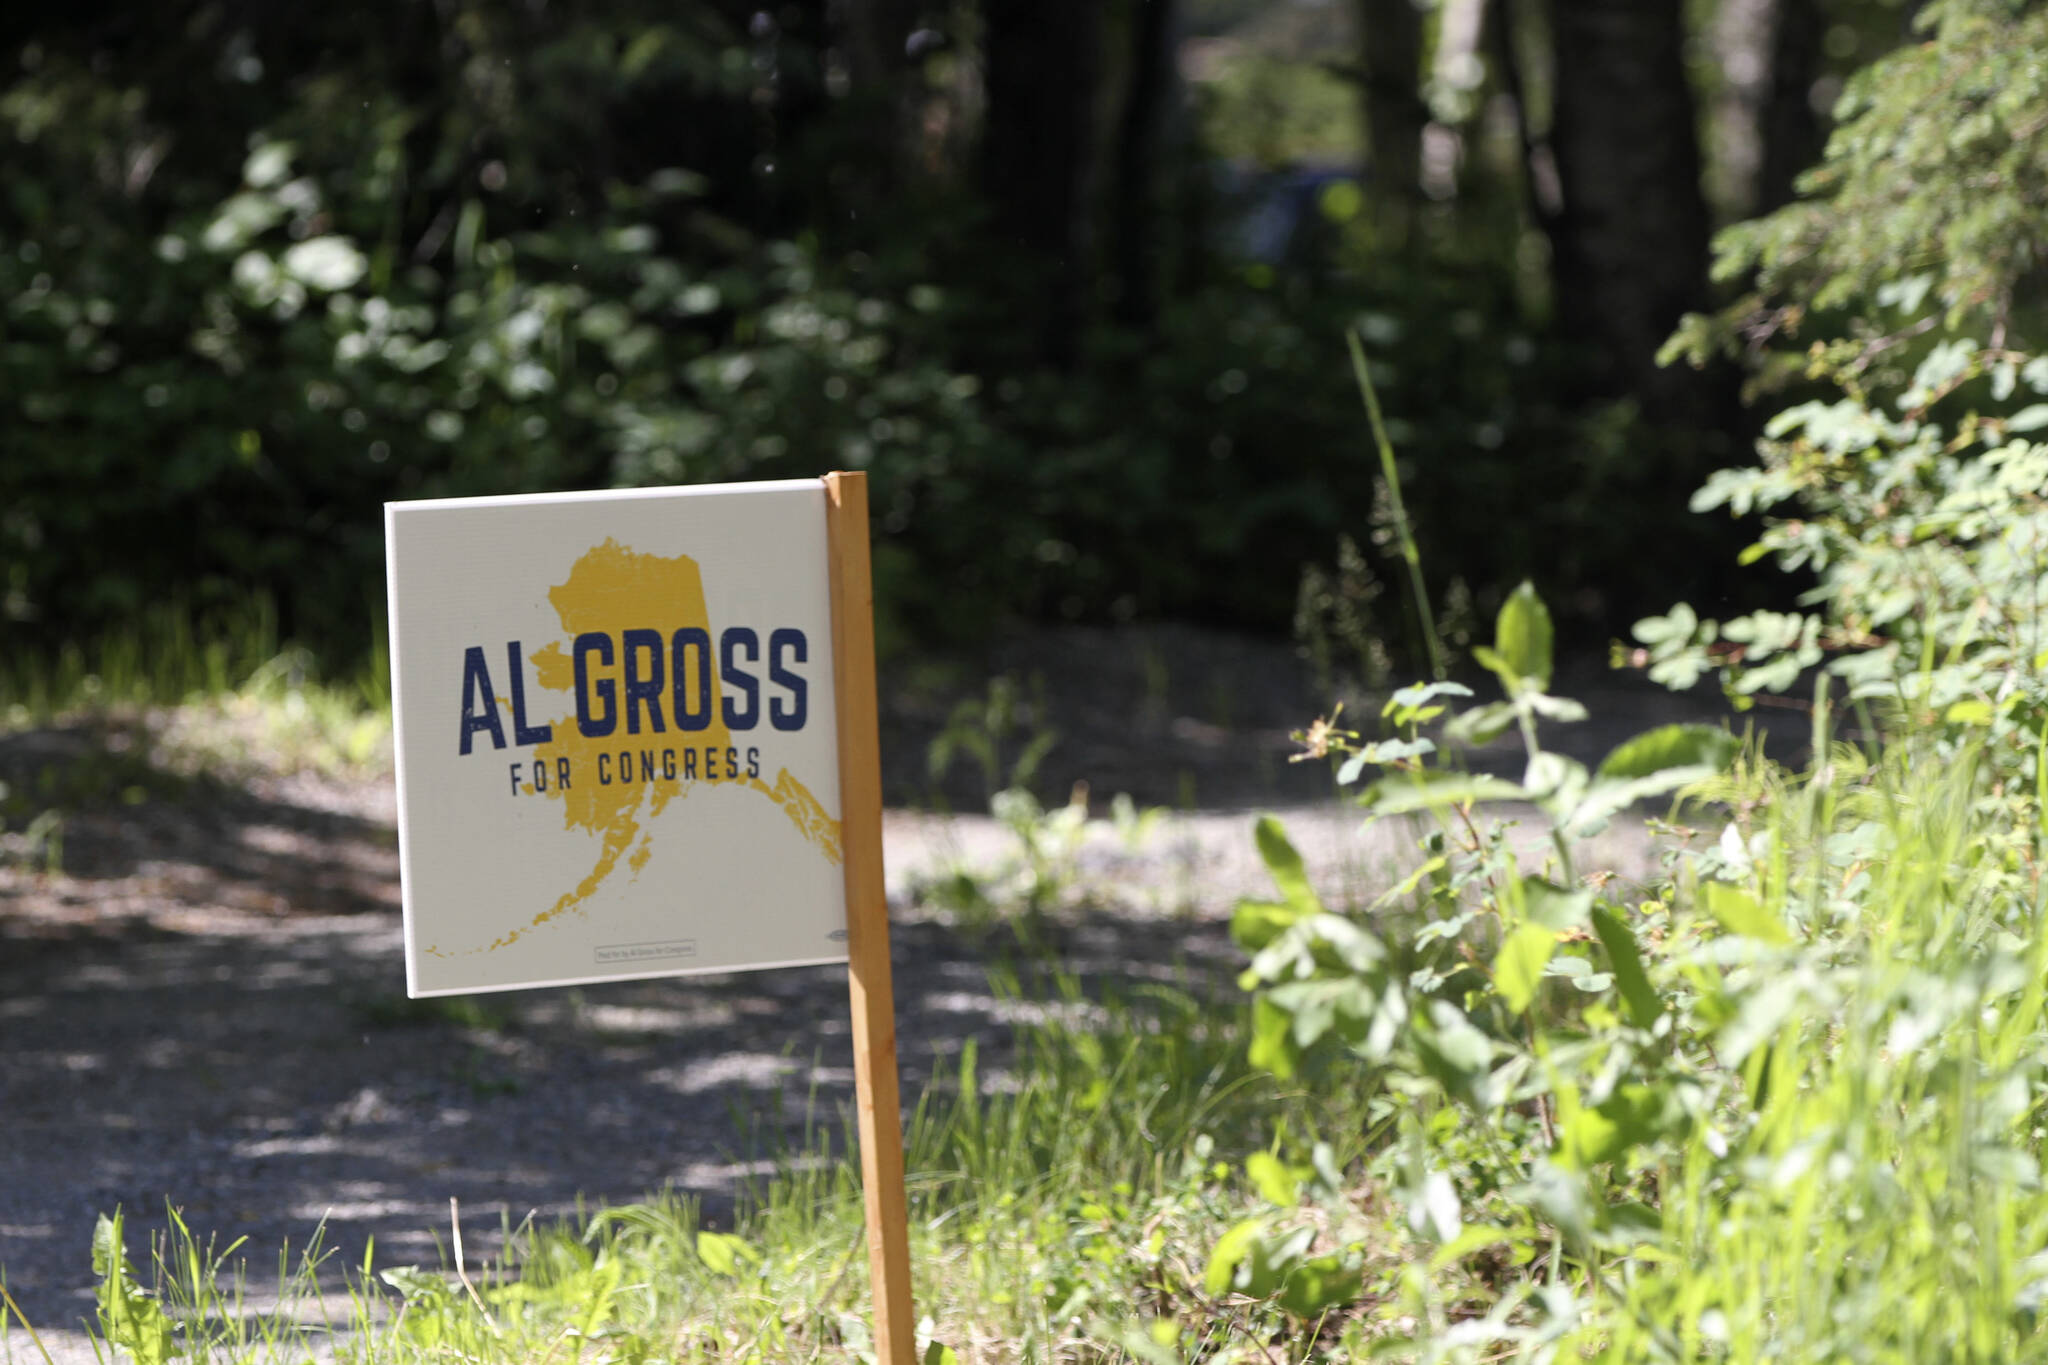 An "Al Gross for Congress" sign sits near the driveway to Gross’ home in Anchorage, Alaska, on Tuesday, June 21, 2022, after he announced plans to withdraw from the U.S. House race. Gross has given little explanation in two statements for why he is ending his campaign, and a woman who answered the door at the Gross home asked a reporter to leave the property. (AP Photo/Mark Thiessen)